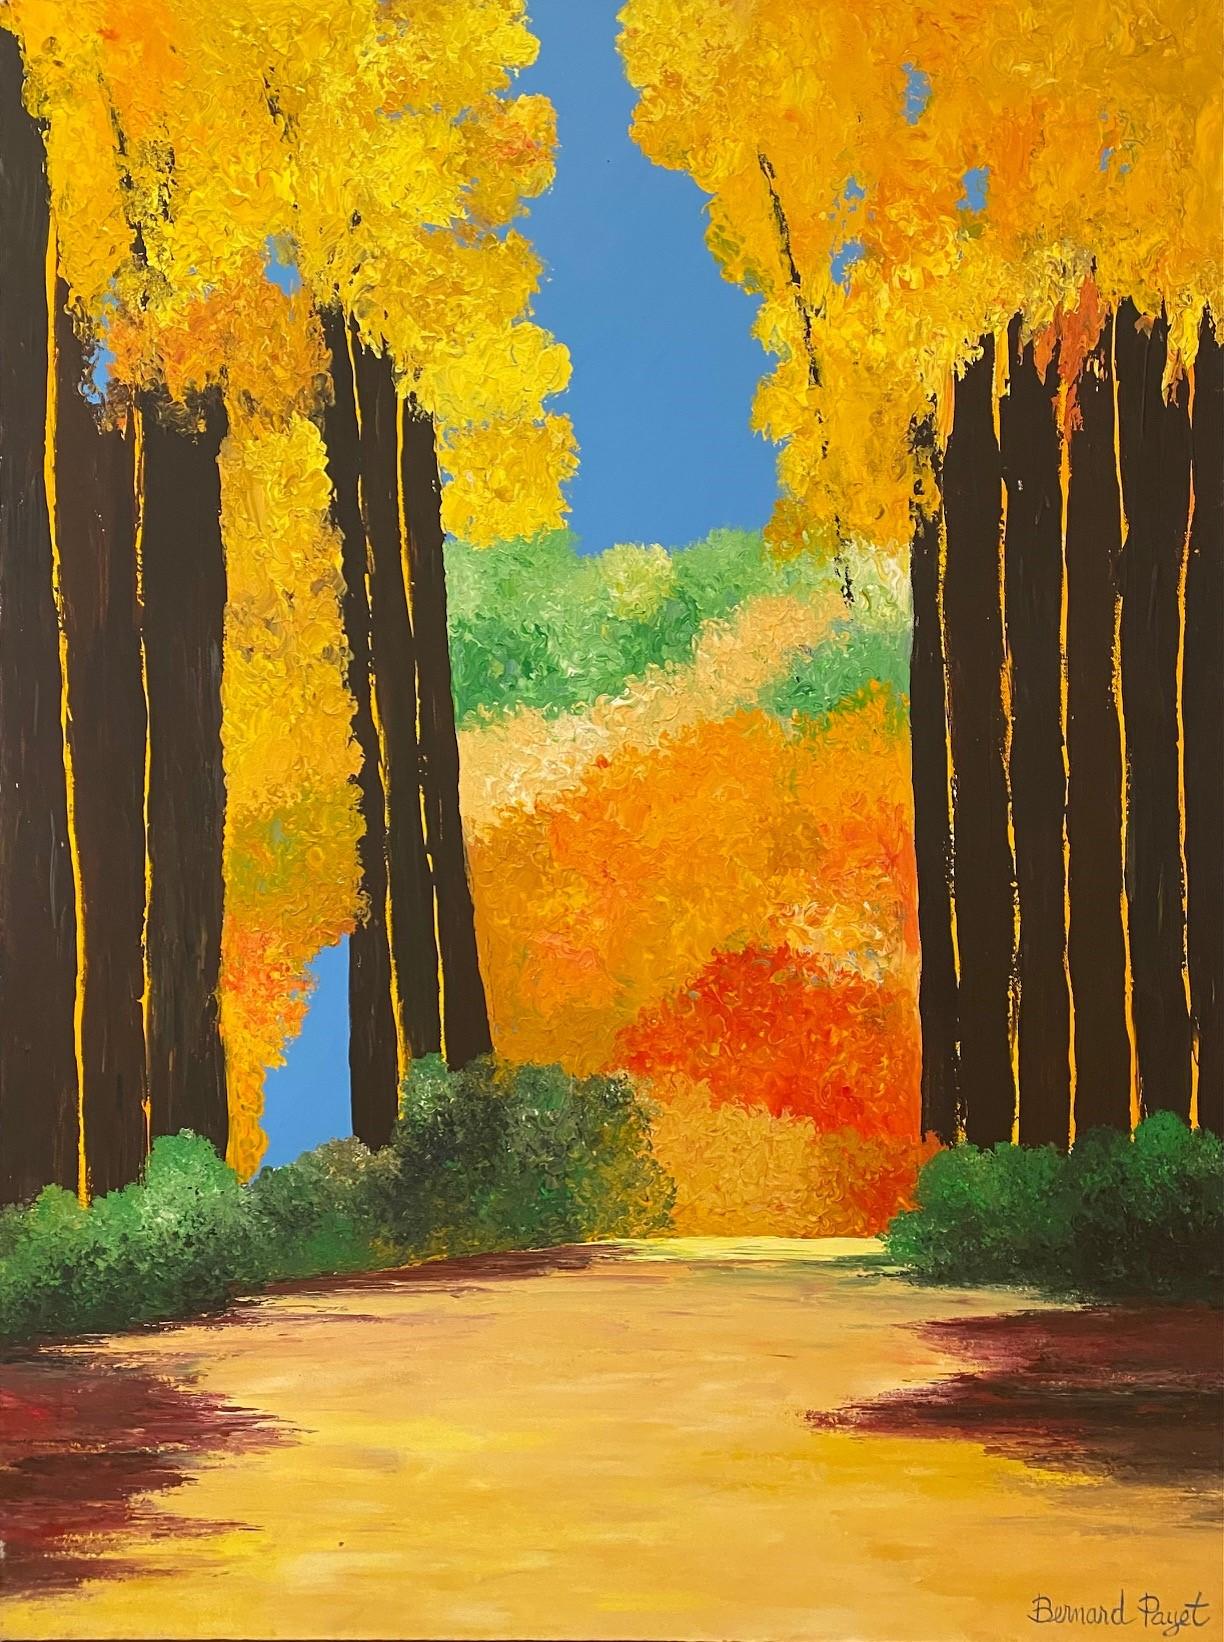 Bernard Payet Landscape Painting - 'The Trees In The Fall' Colorful Landscape Oil Painting by Payet